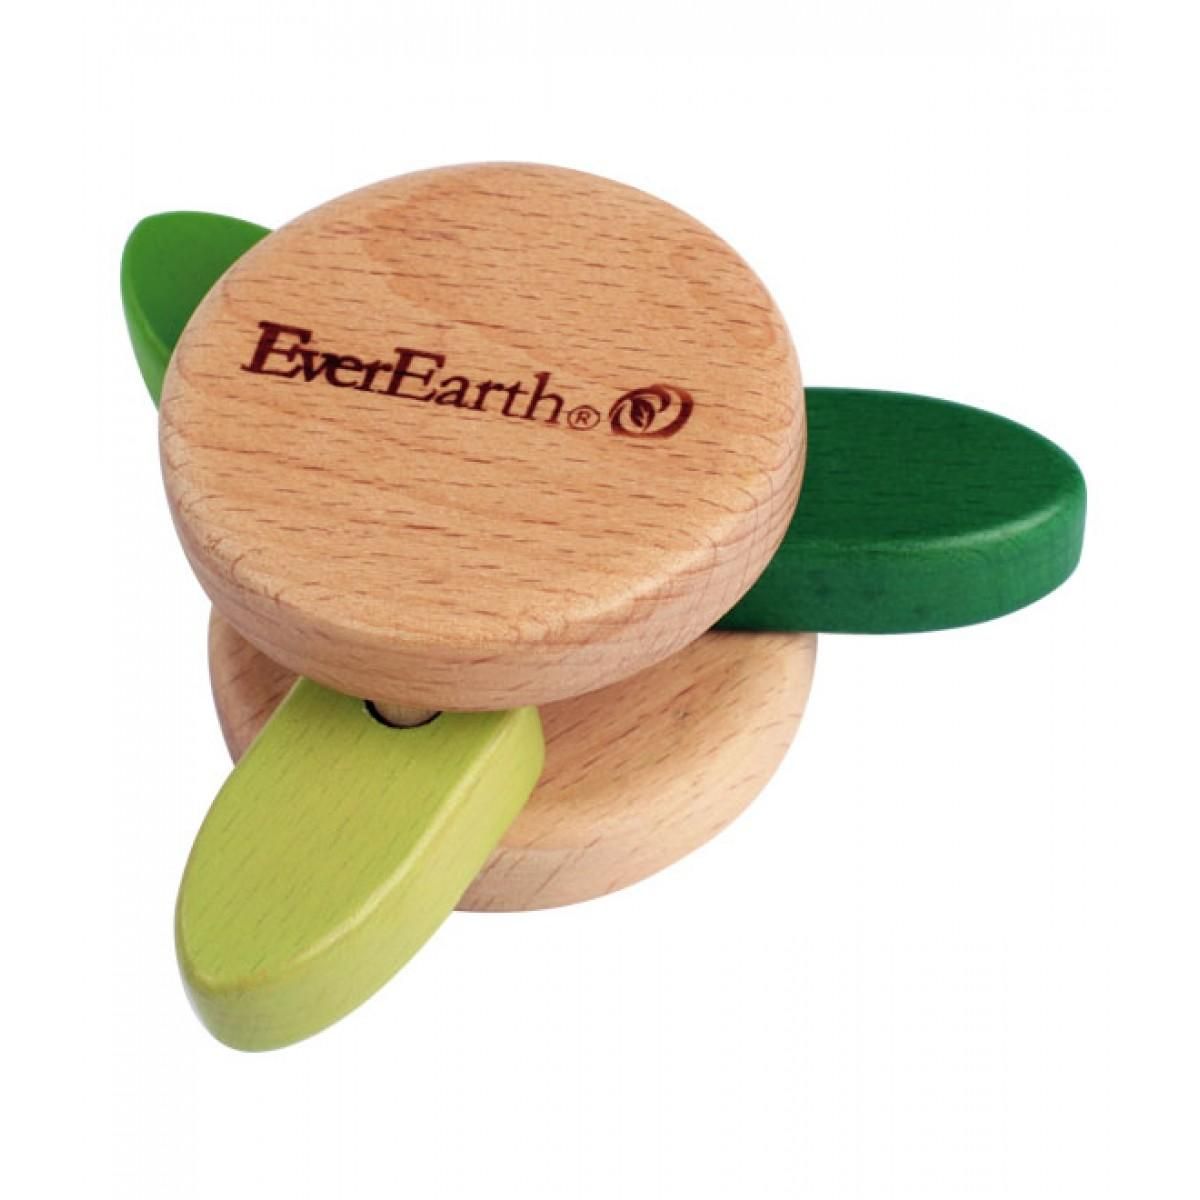 Ever earth Leaf rattle toy